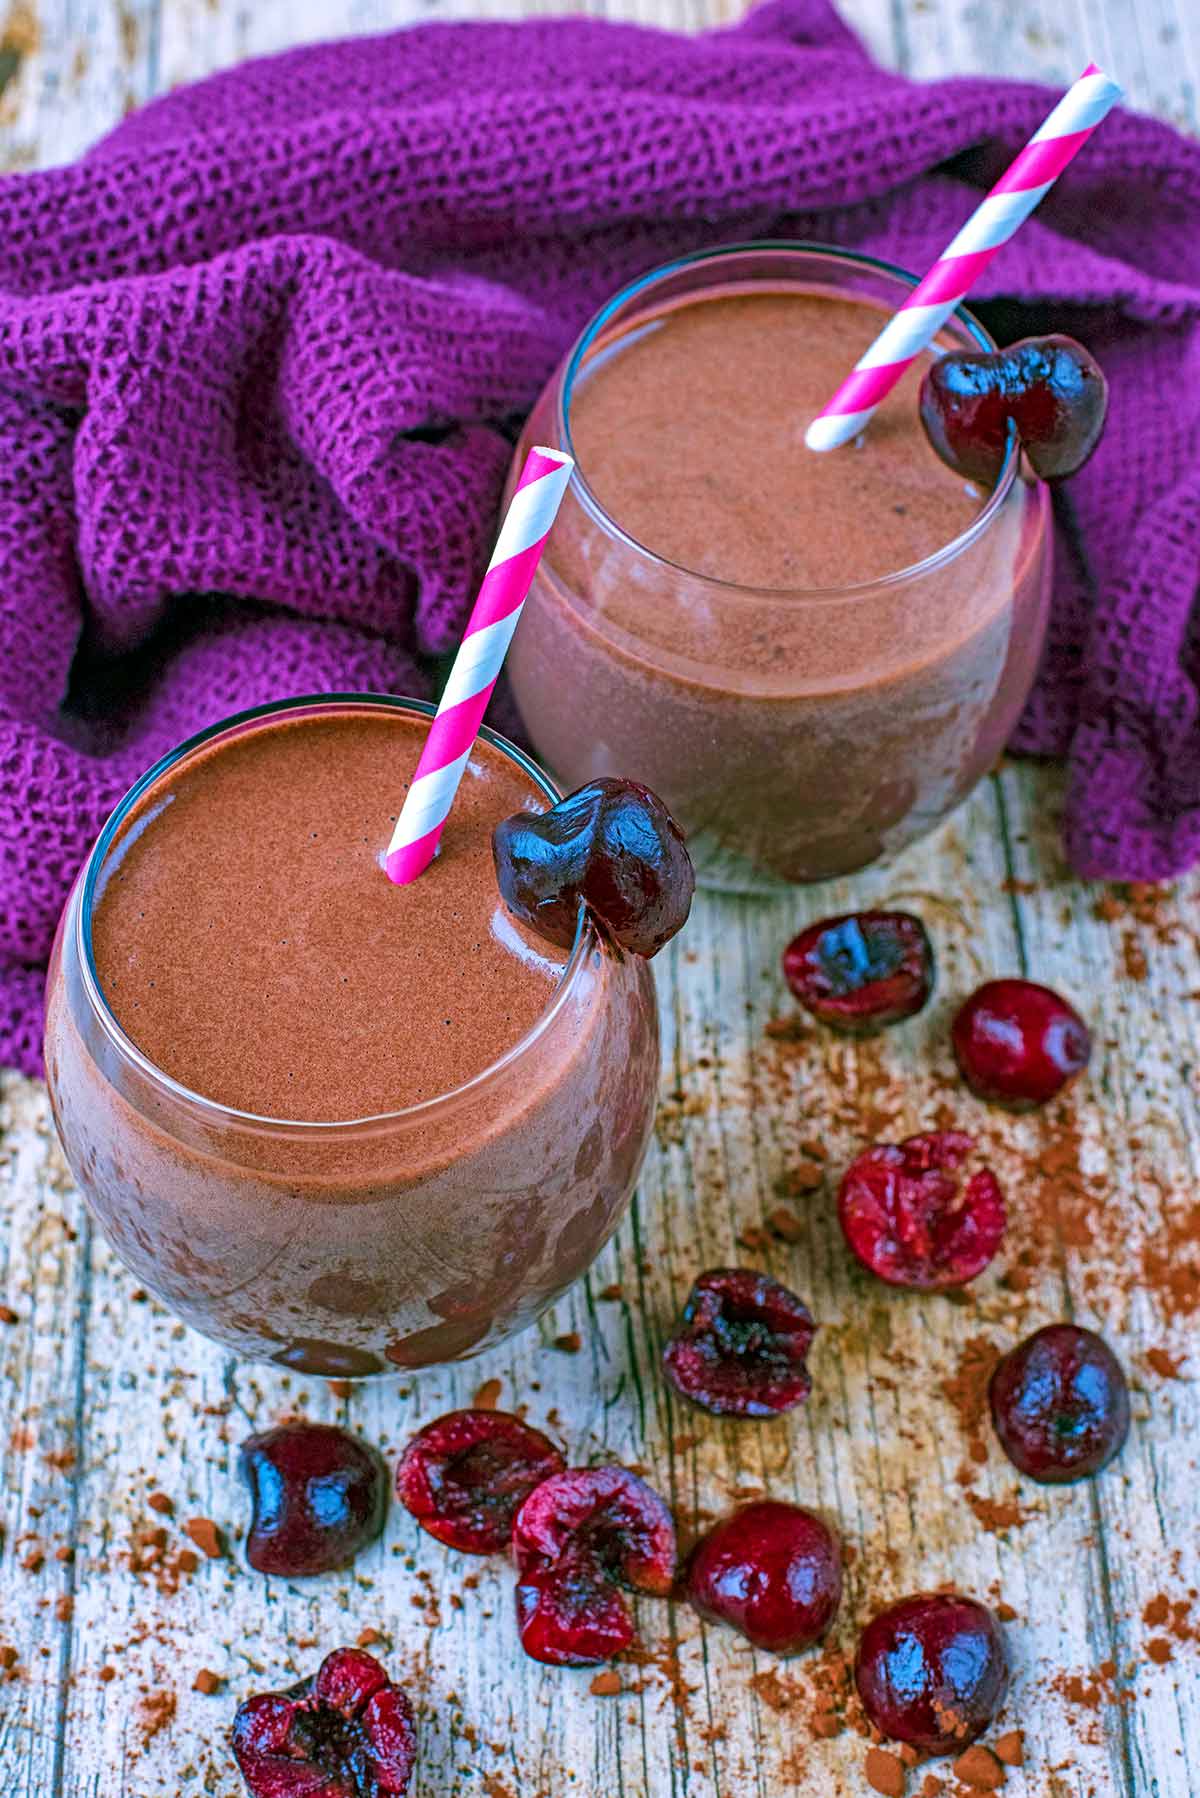 Glasses of Chocolate smoothie with striped straws.